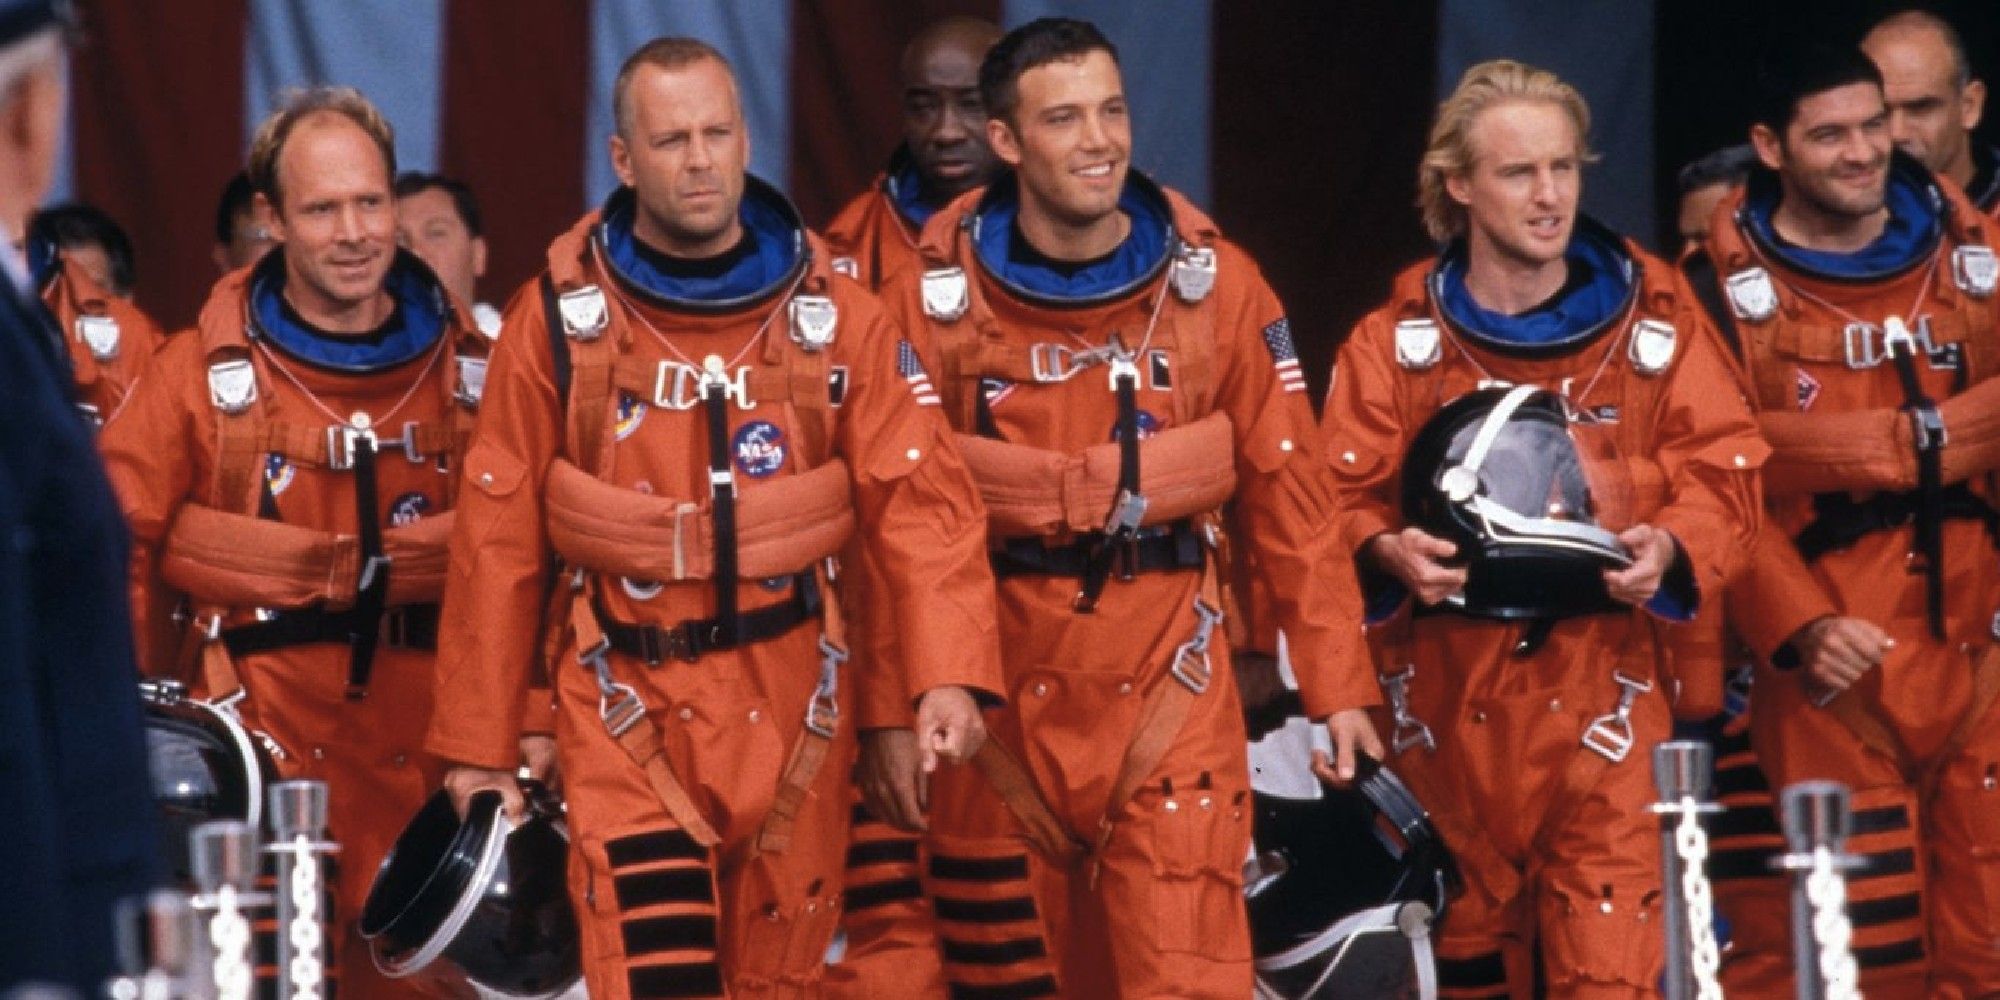 A crew of astronauts walking together in the movie Armageddon.